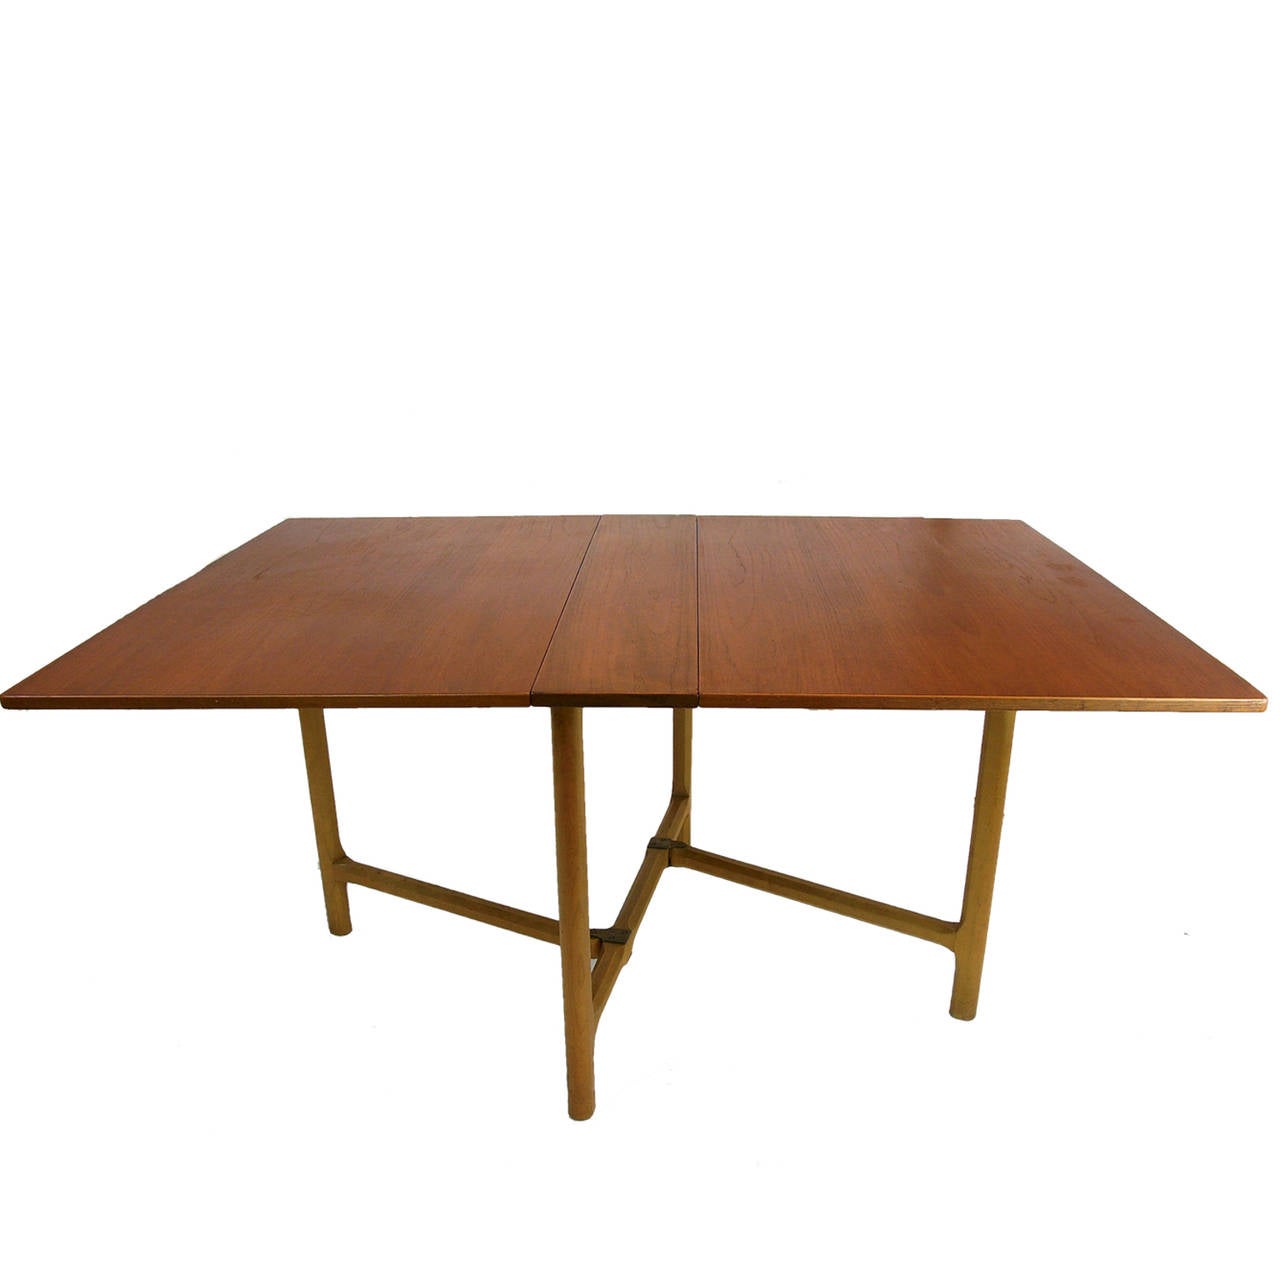 A versatile and rare Bruno Mathsson table in teak with sculptural beech legs, and brass detail. The table compacts to an easy to store 9